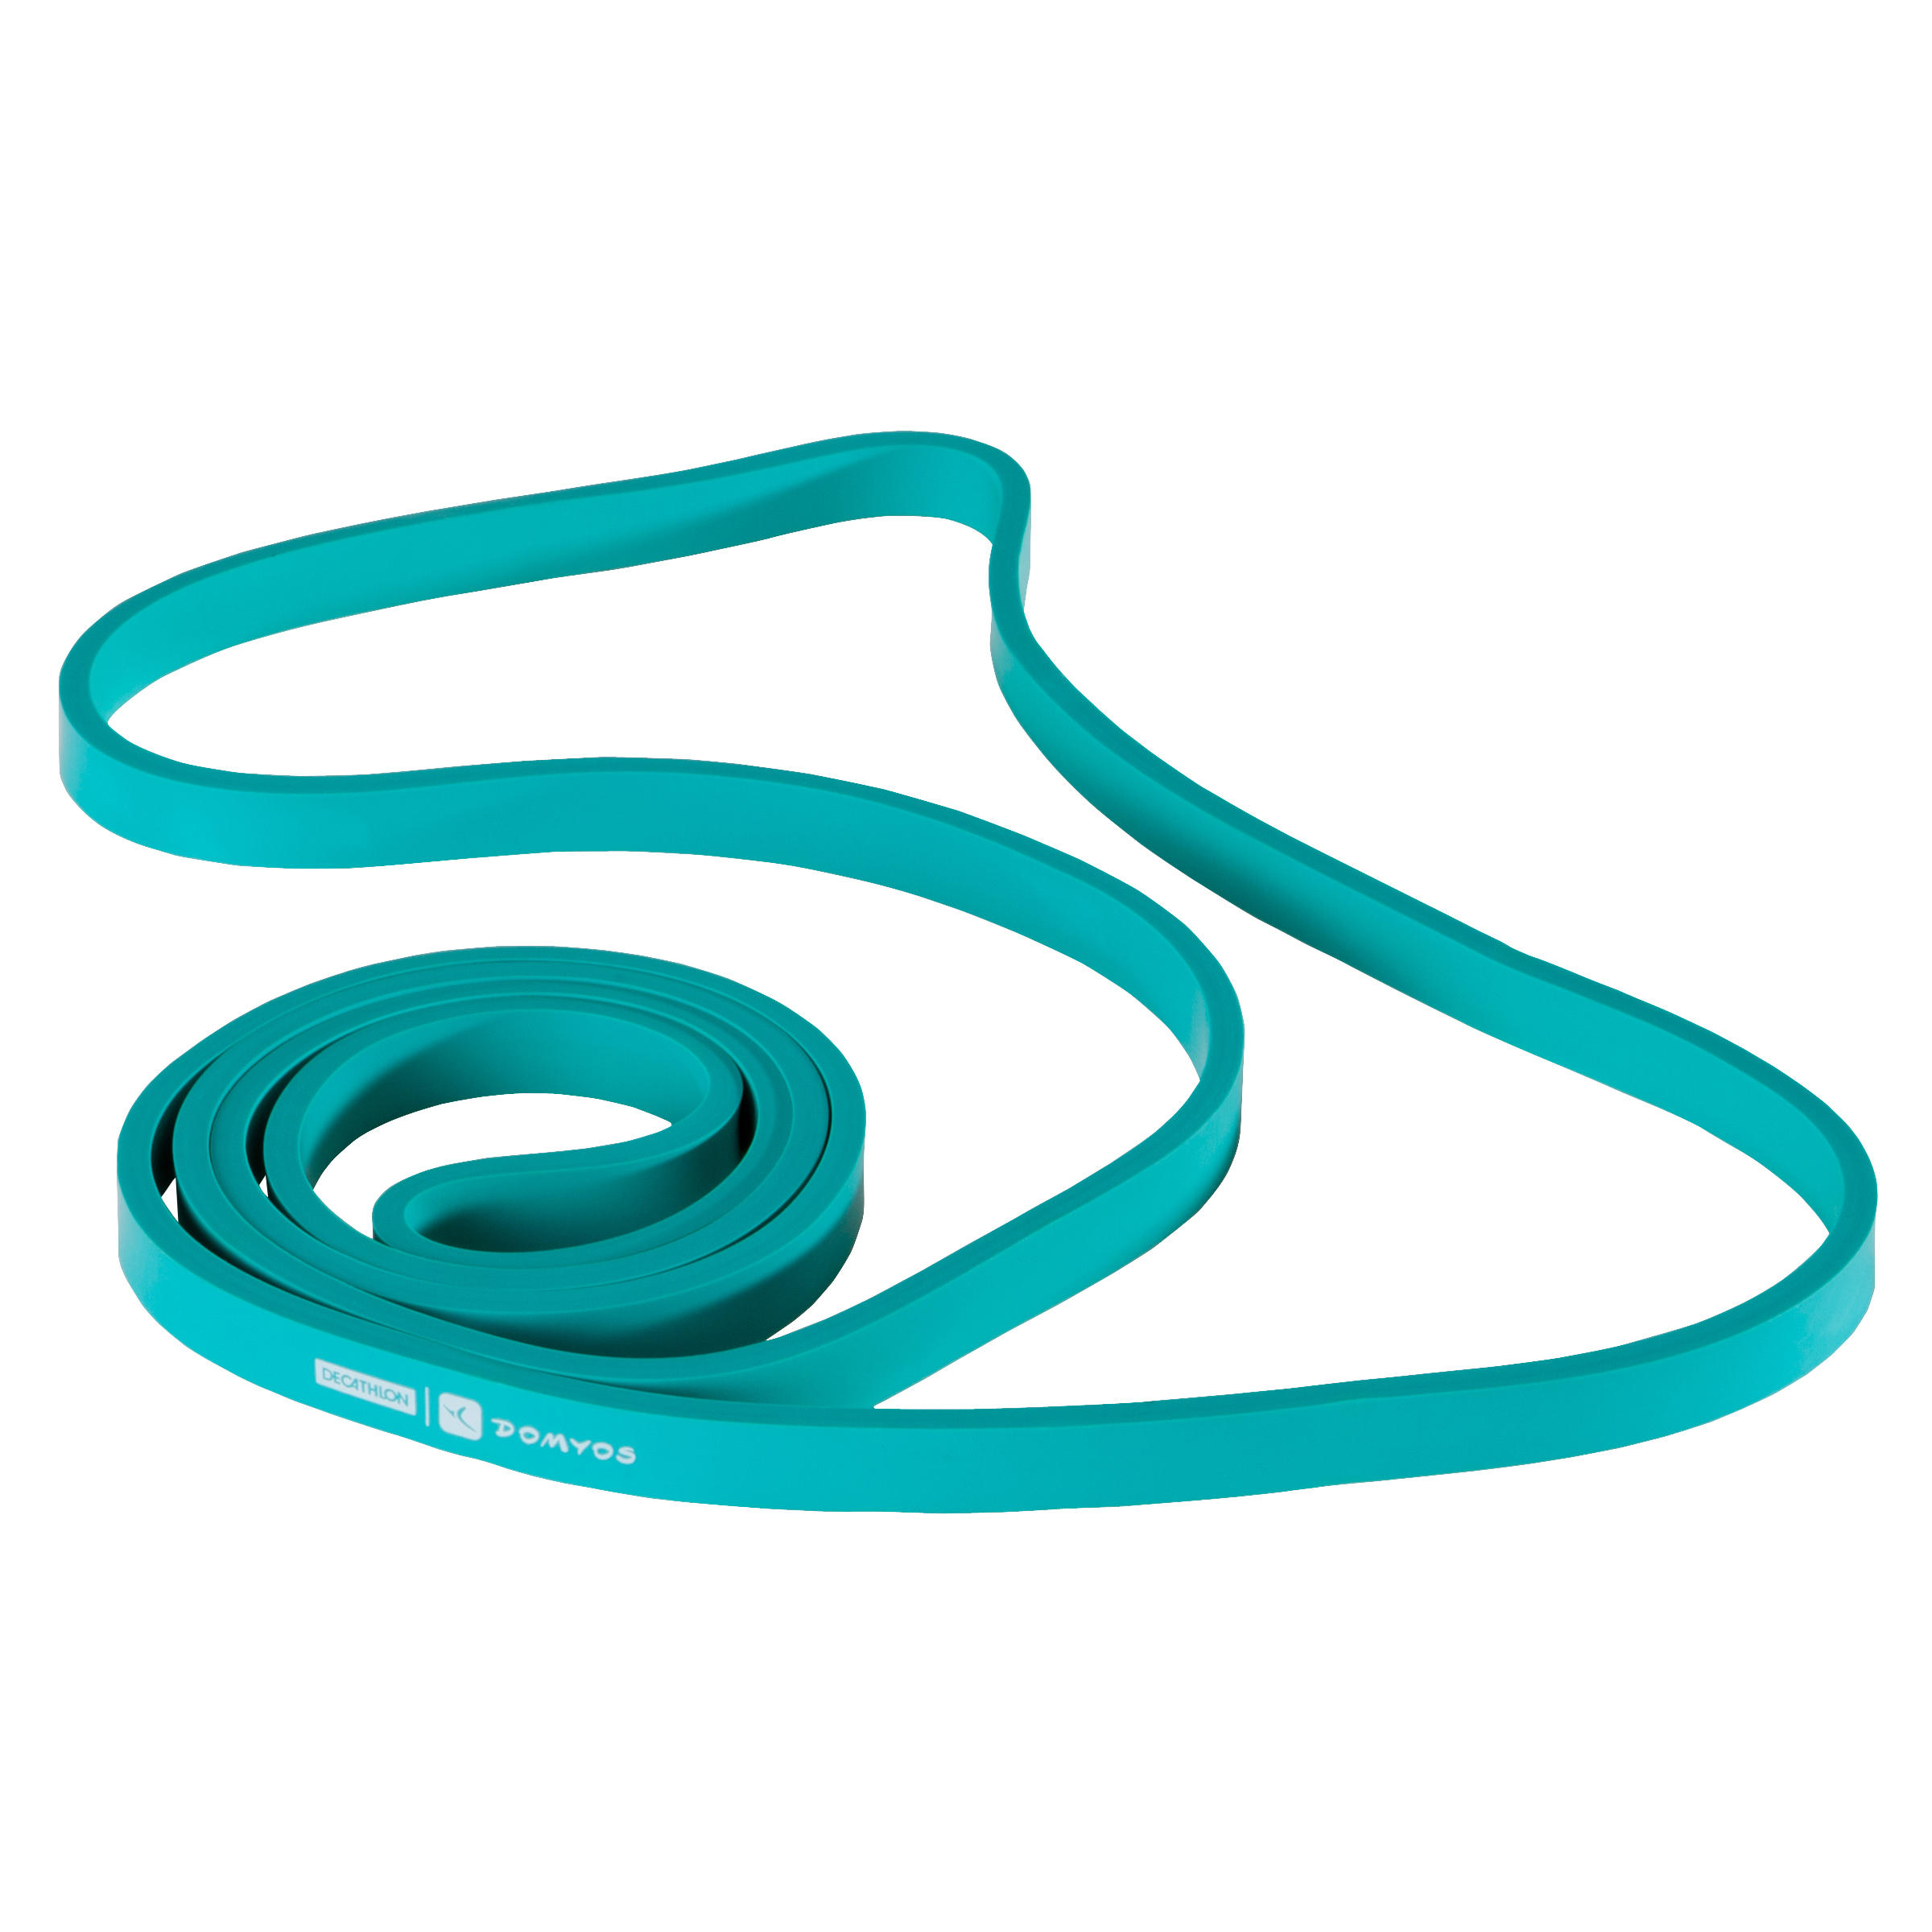 decathlon exercise bands